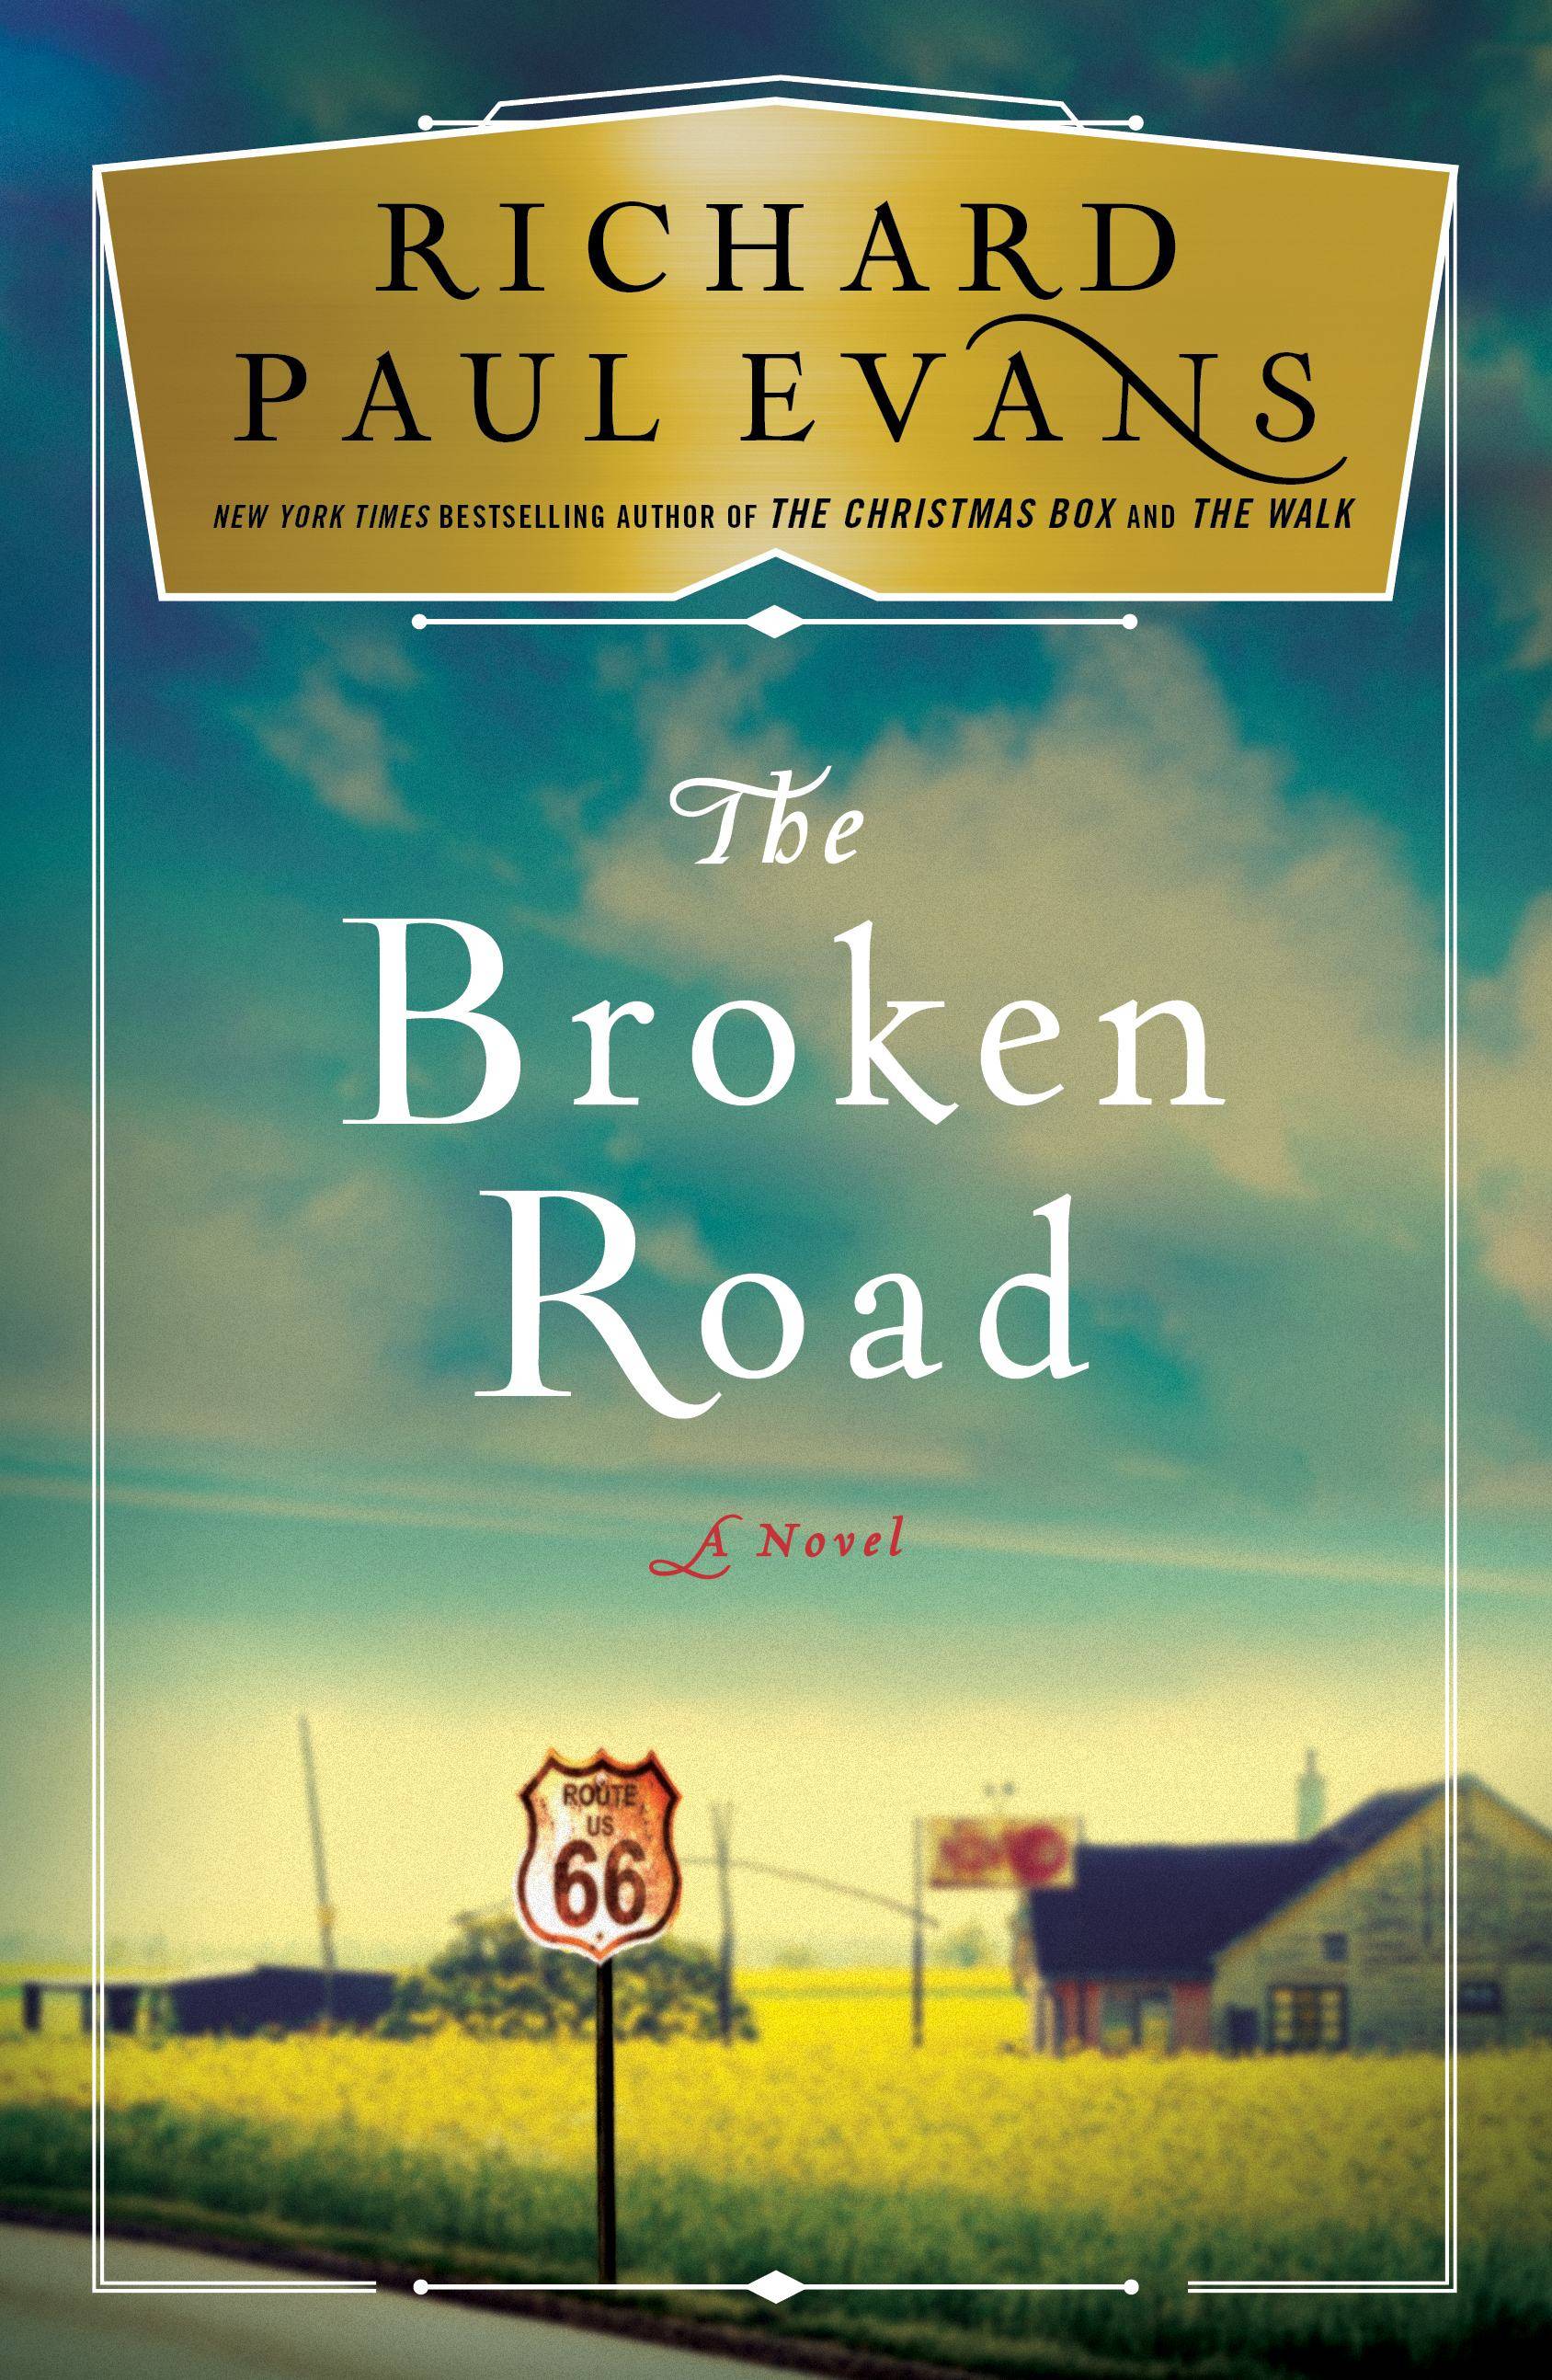 The Bookworm Sez: ‘The Broken Road’ pretty smooth